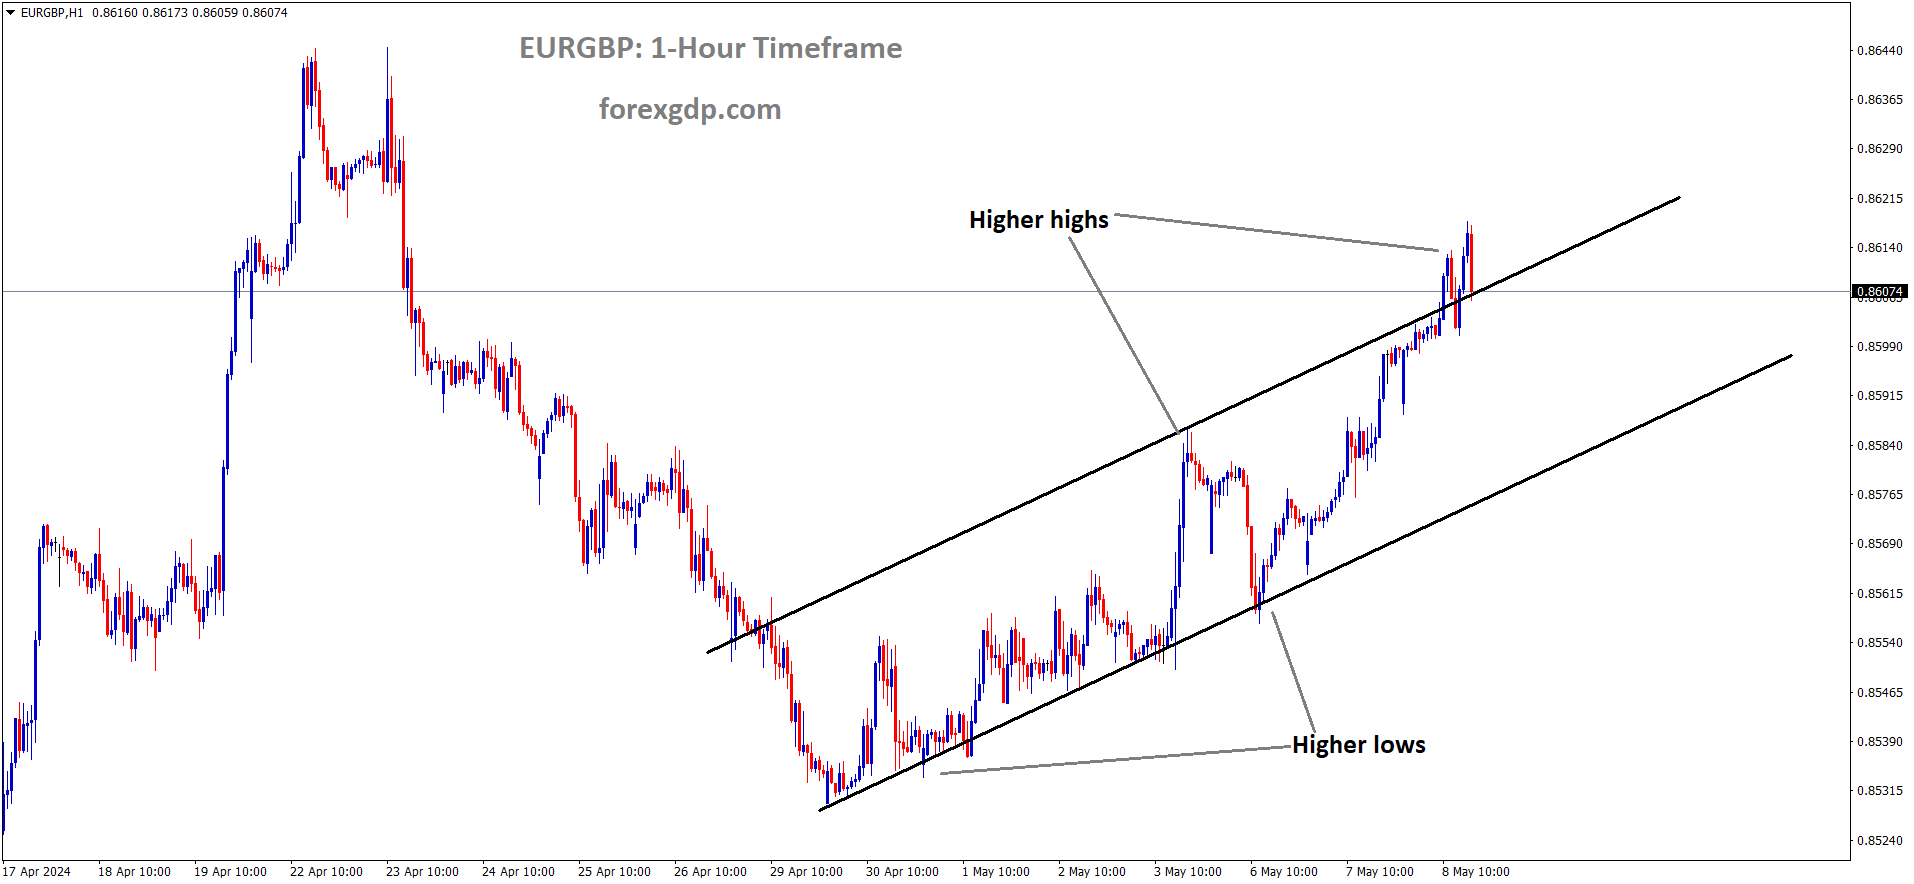 EURGBP is moving in Ascending channel and market has reached higher high area of the channel